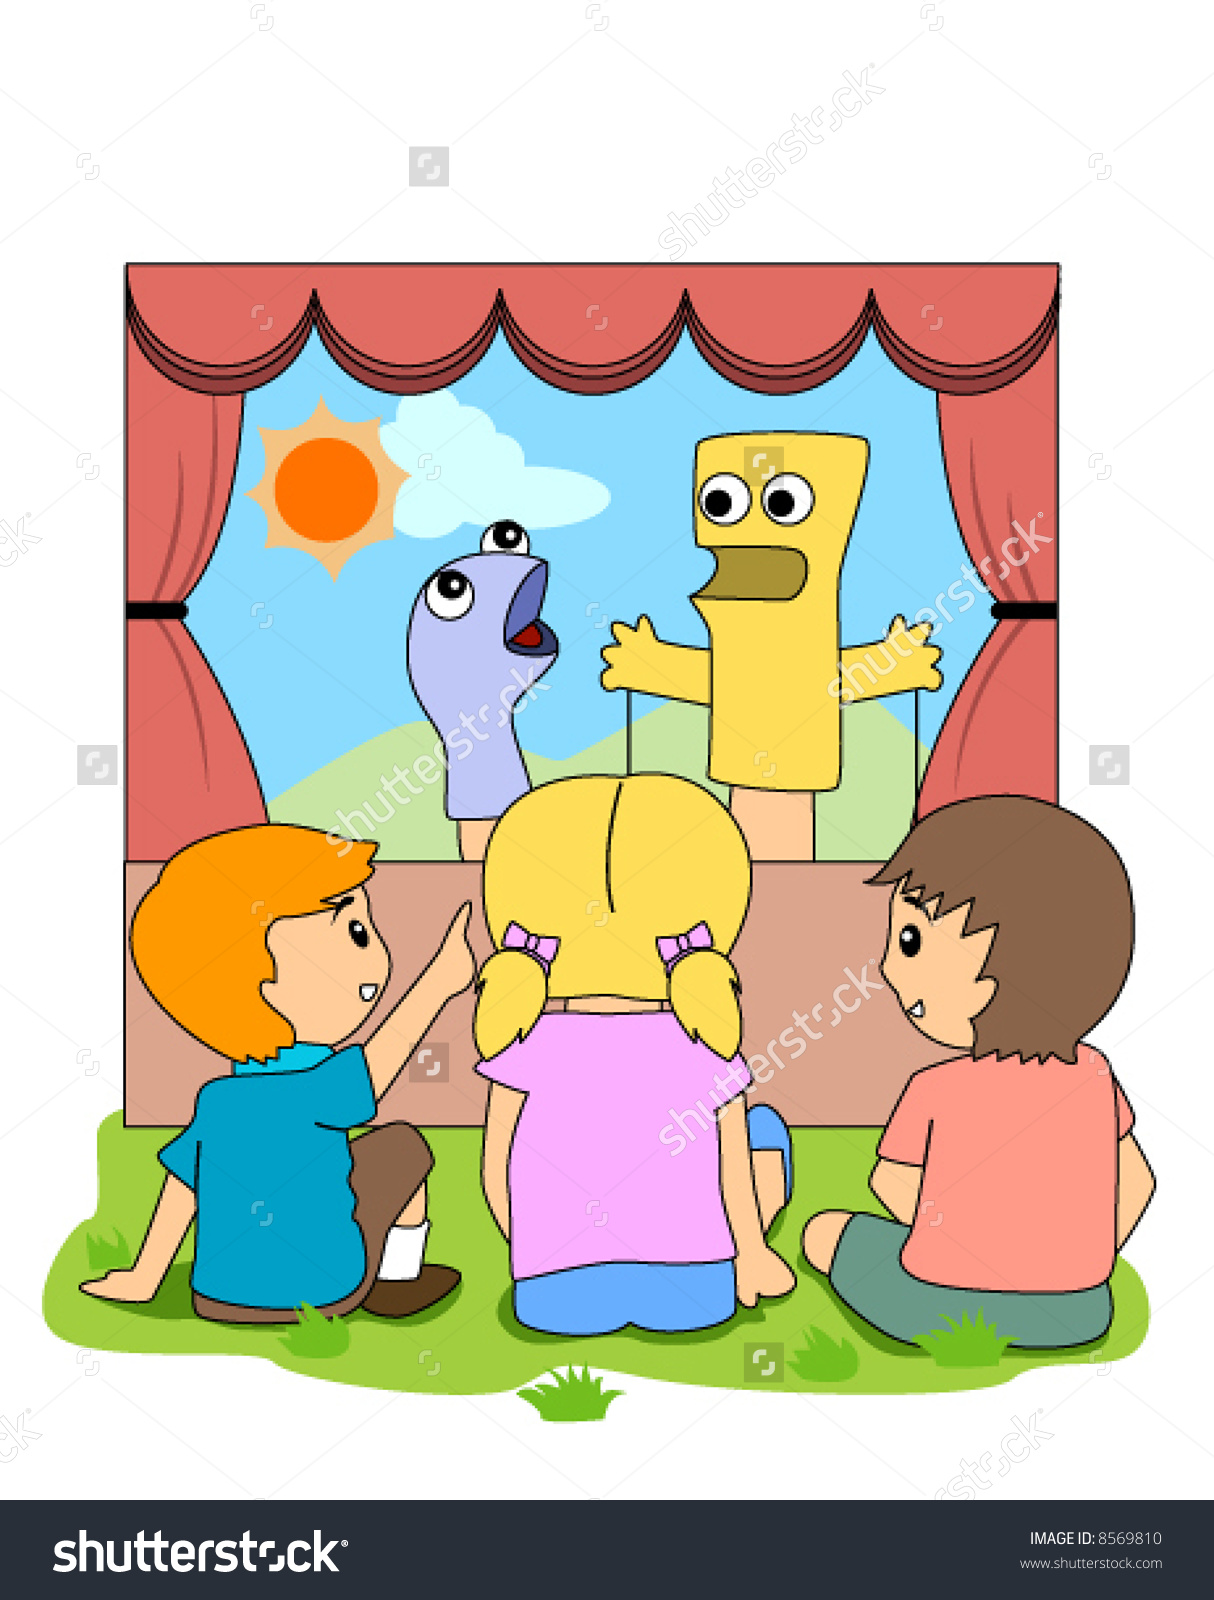 Puppet show clipart 20 free Cliparts.